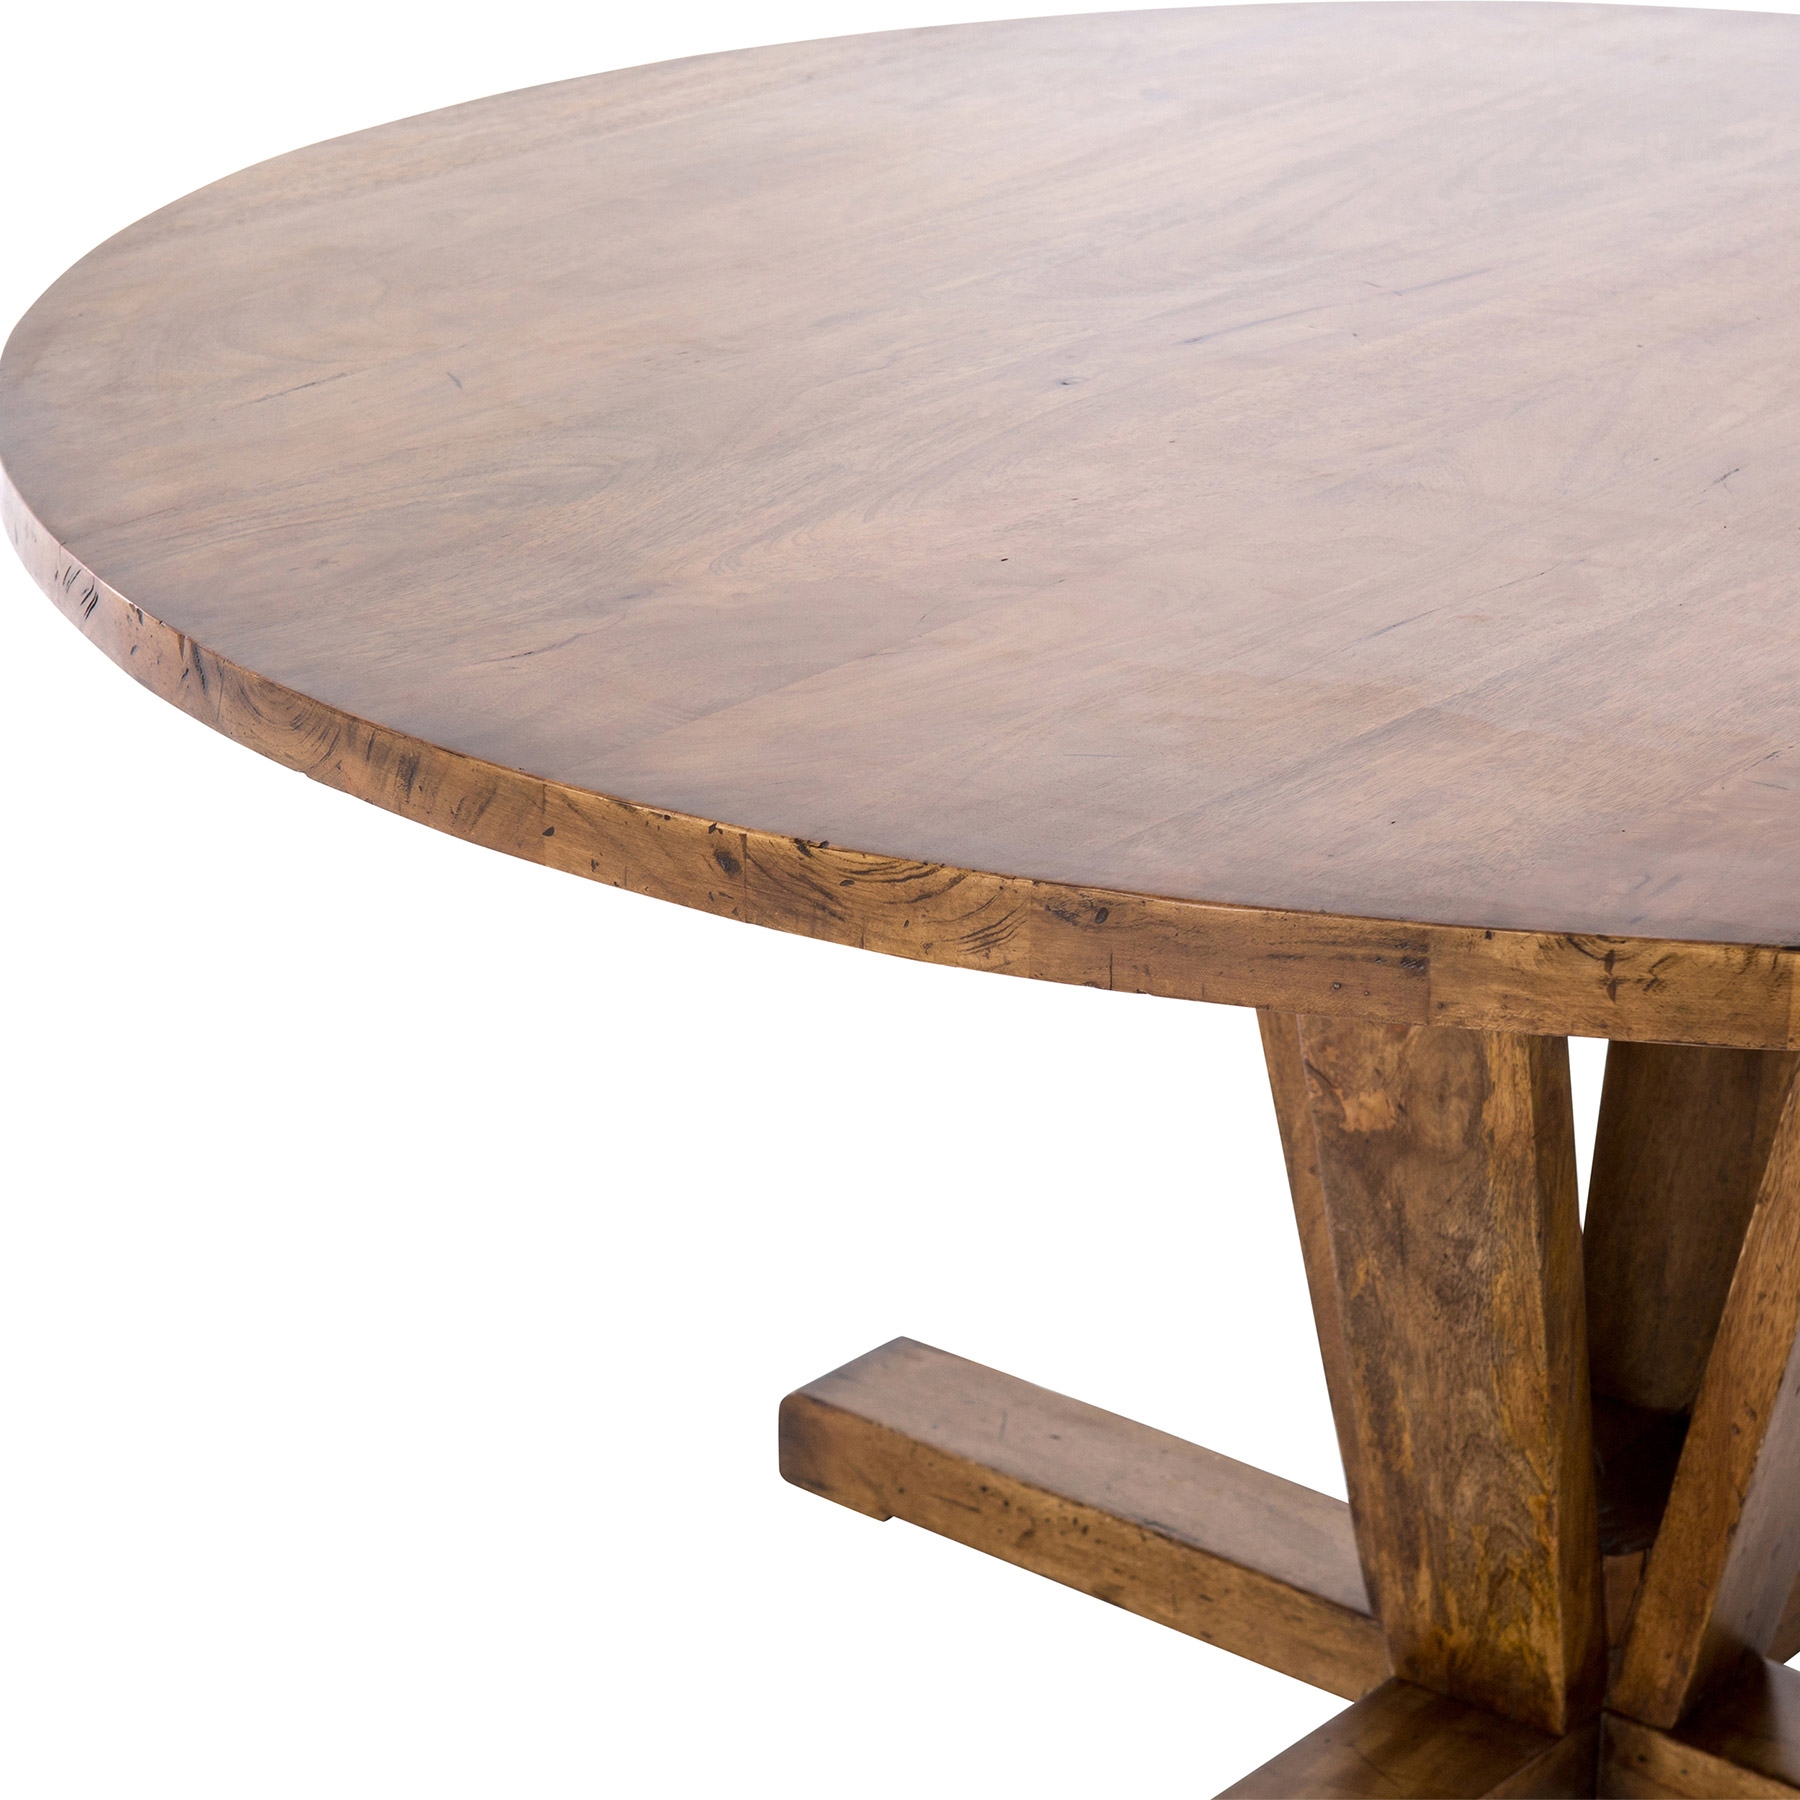 Camille Modern Classic Round Reclaimed Mango Wood Dining Table - 60D - Image 4